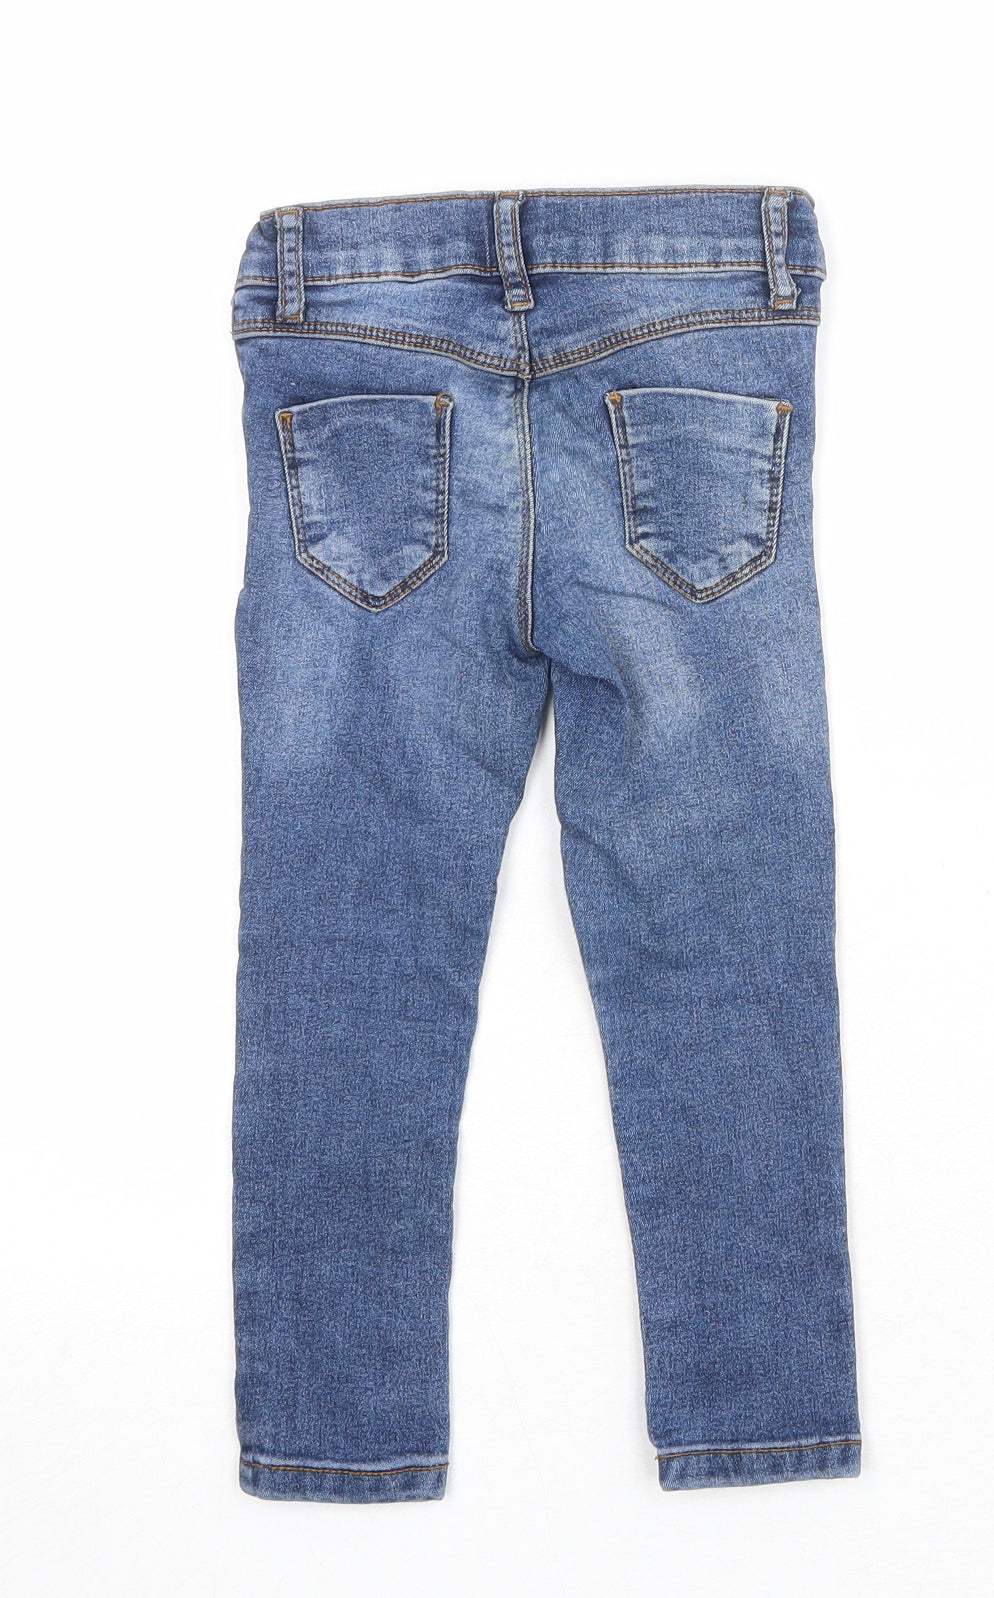 Mothercare Boys Blue Coir Skinny Jeans Size 2-3 Years Regular Snap